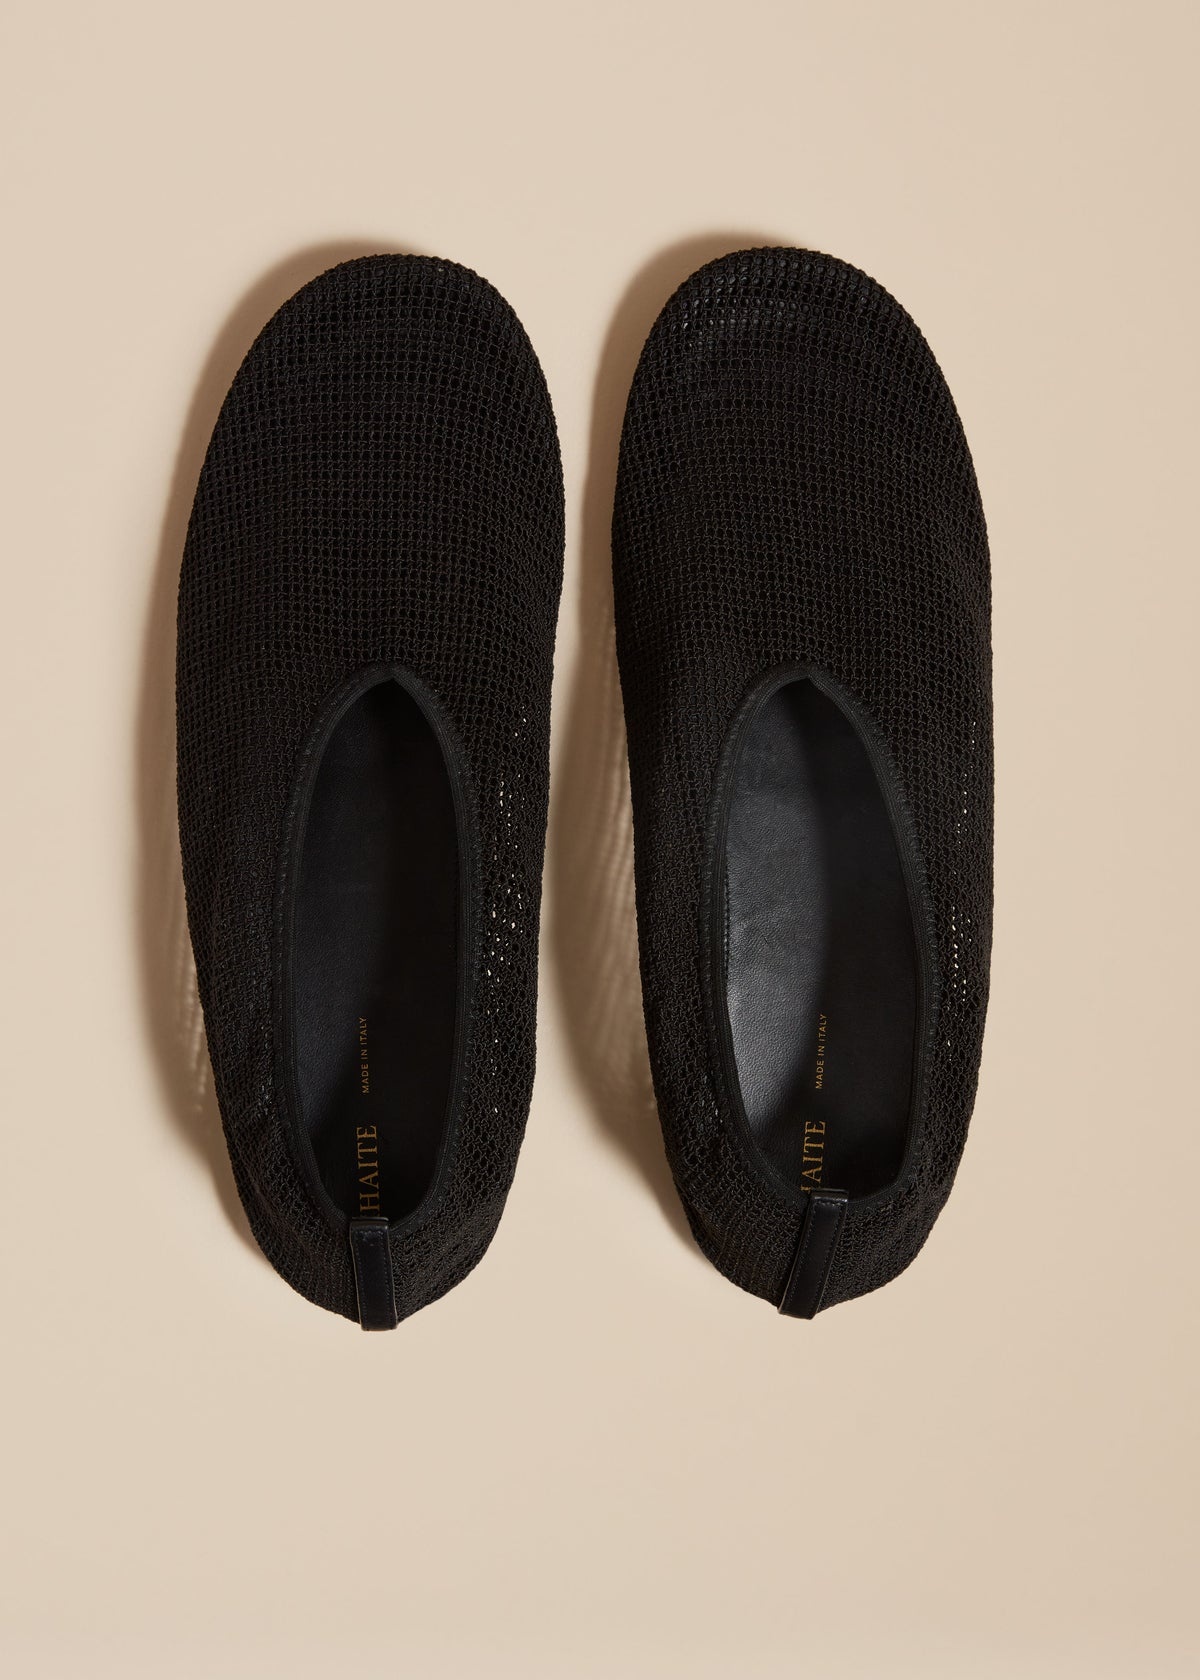 The Maiden Flat in Black - 3